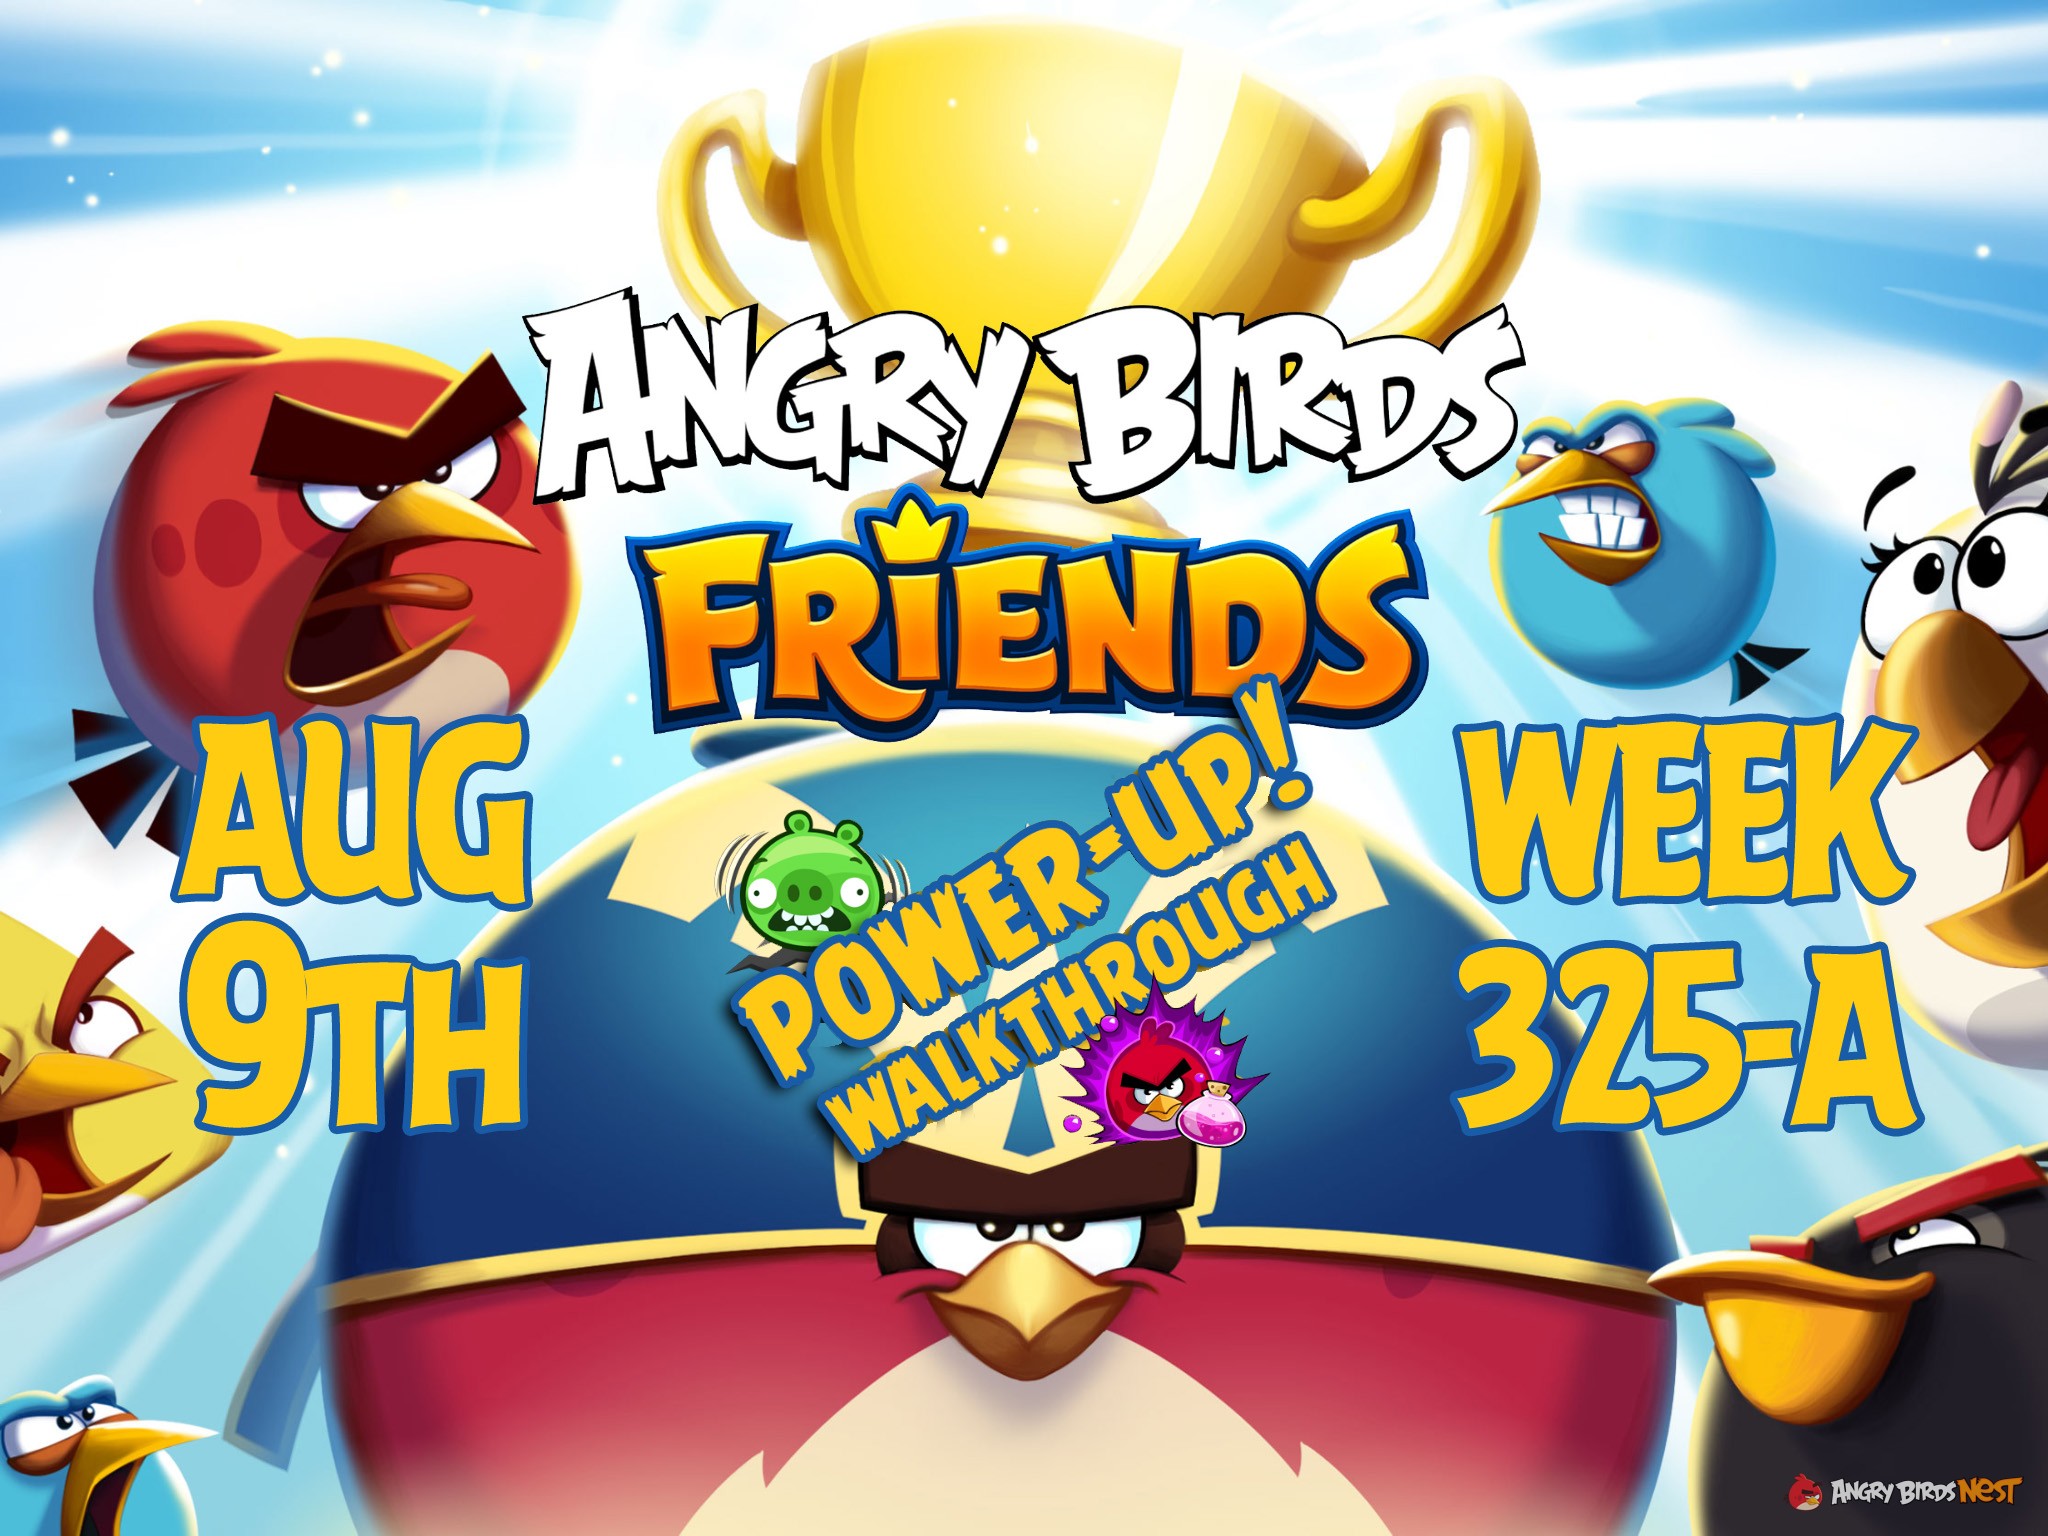 Angry-Birds-Friends-Tournament-Week-325-A-Feature-Image-PU